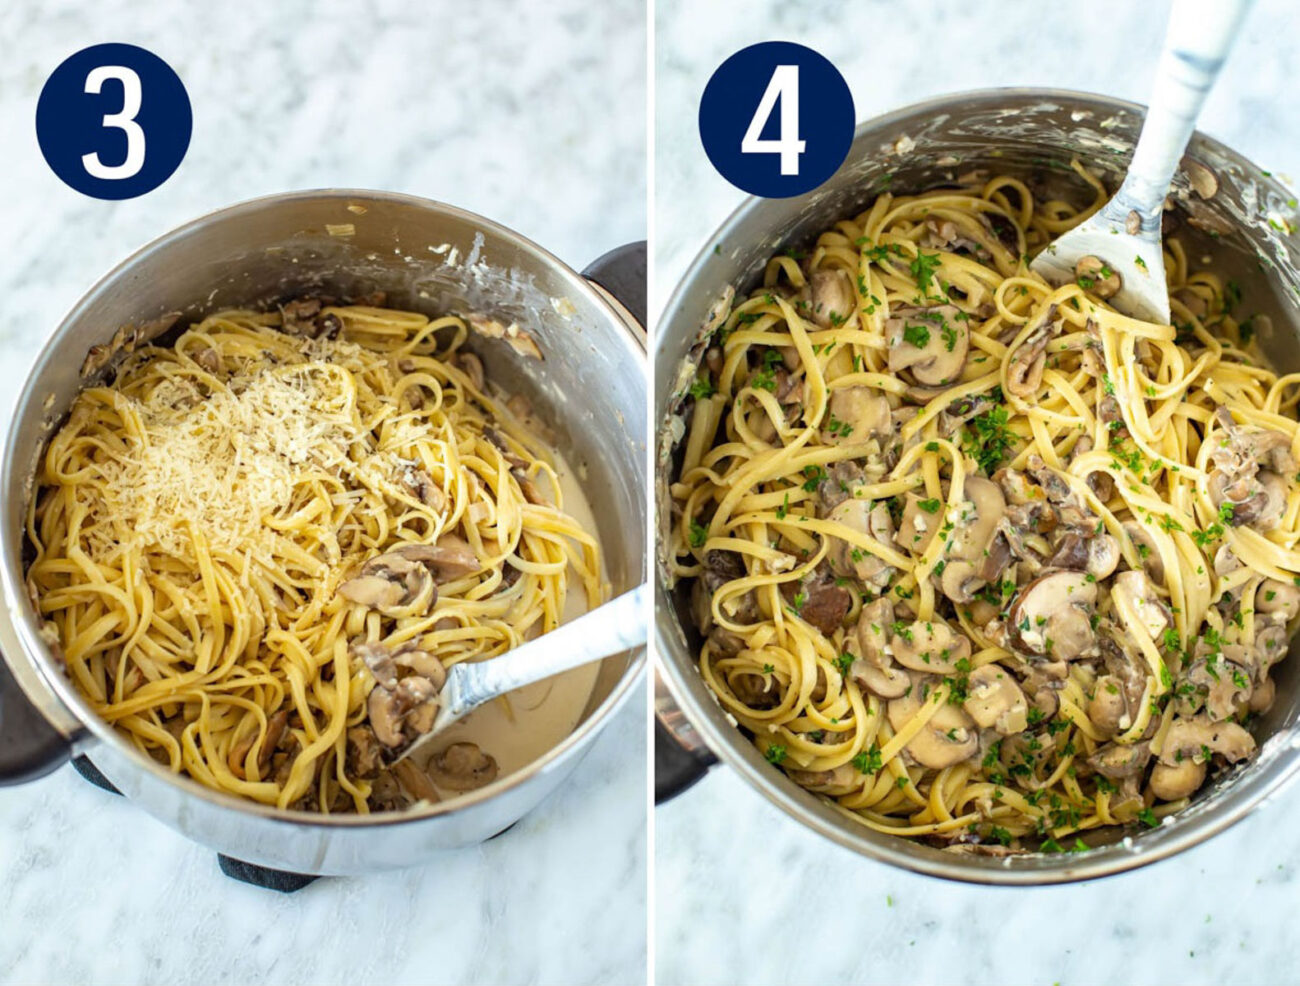 Steps 3 and 4 for making creamy mushroom pasta: Add everything to the pot and serve and enjoy.